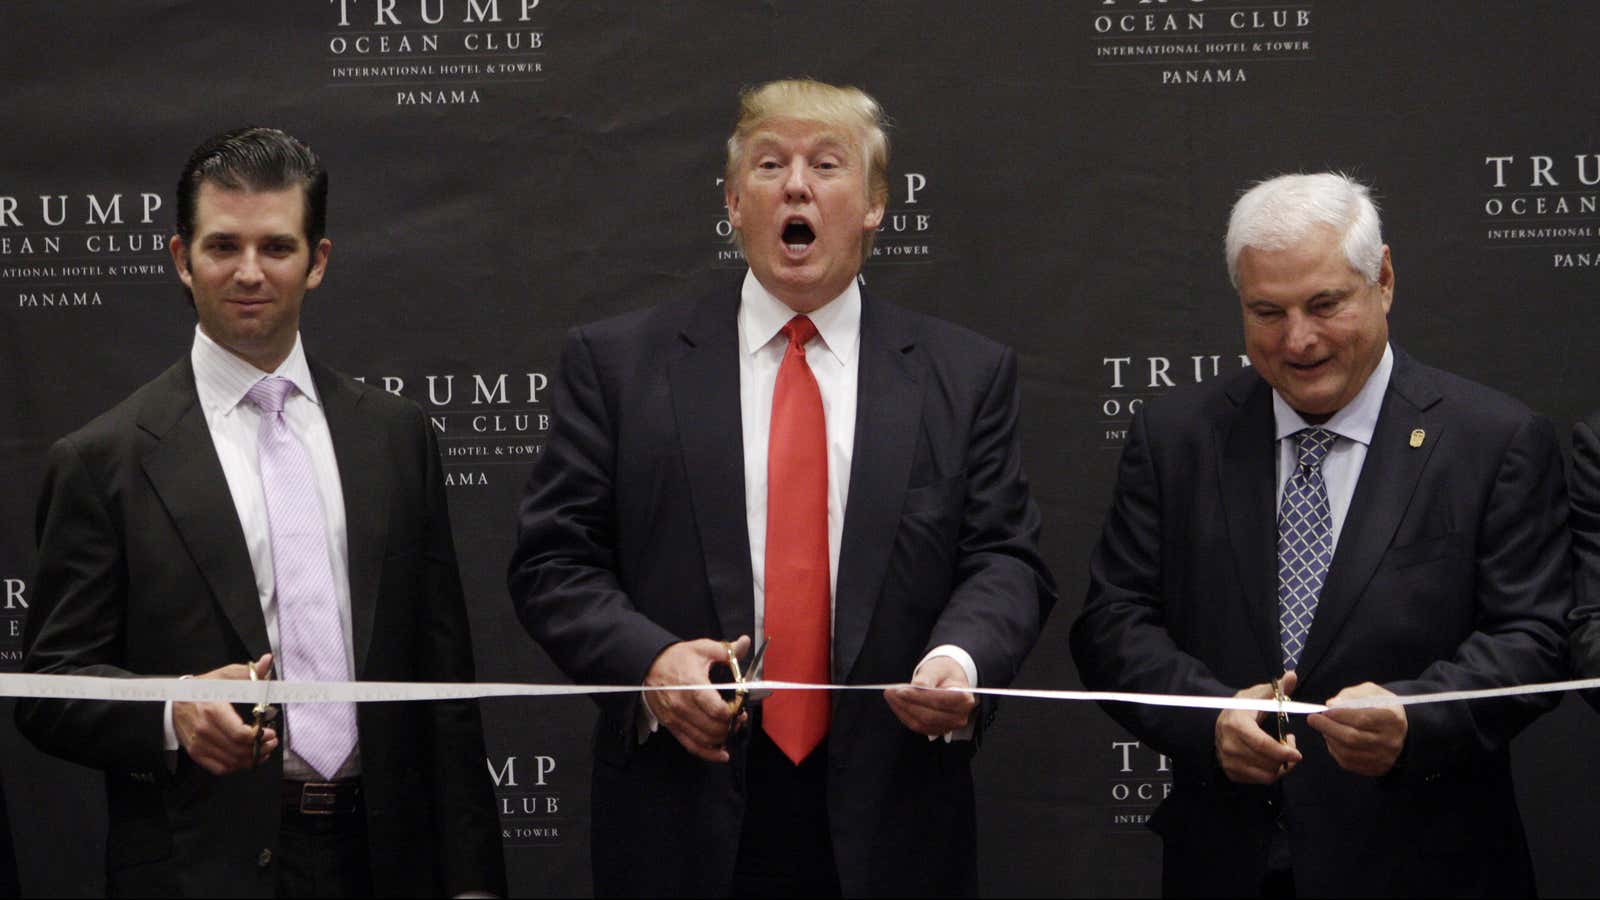 Trump and his son Donald Jr. open the hotel alongside Panama’s president in 2011.